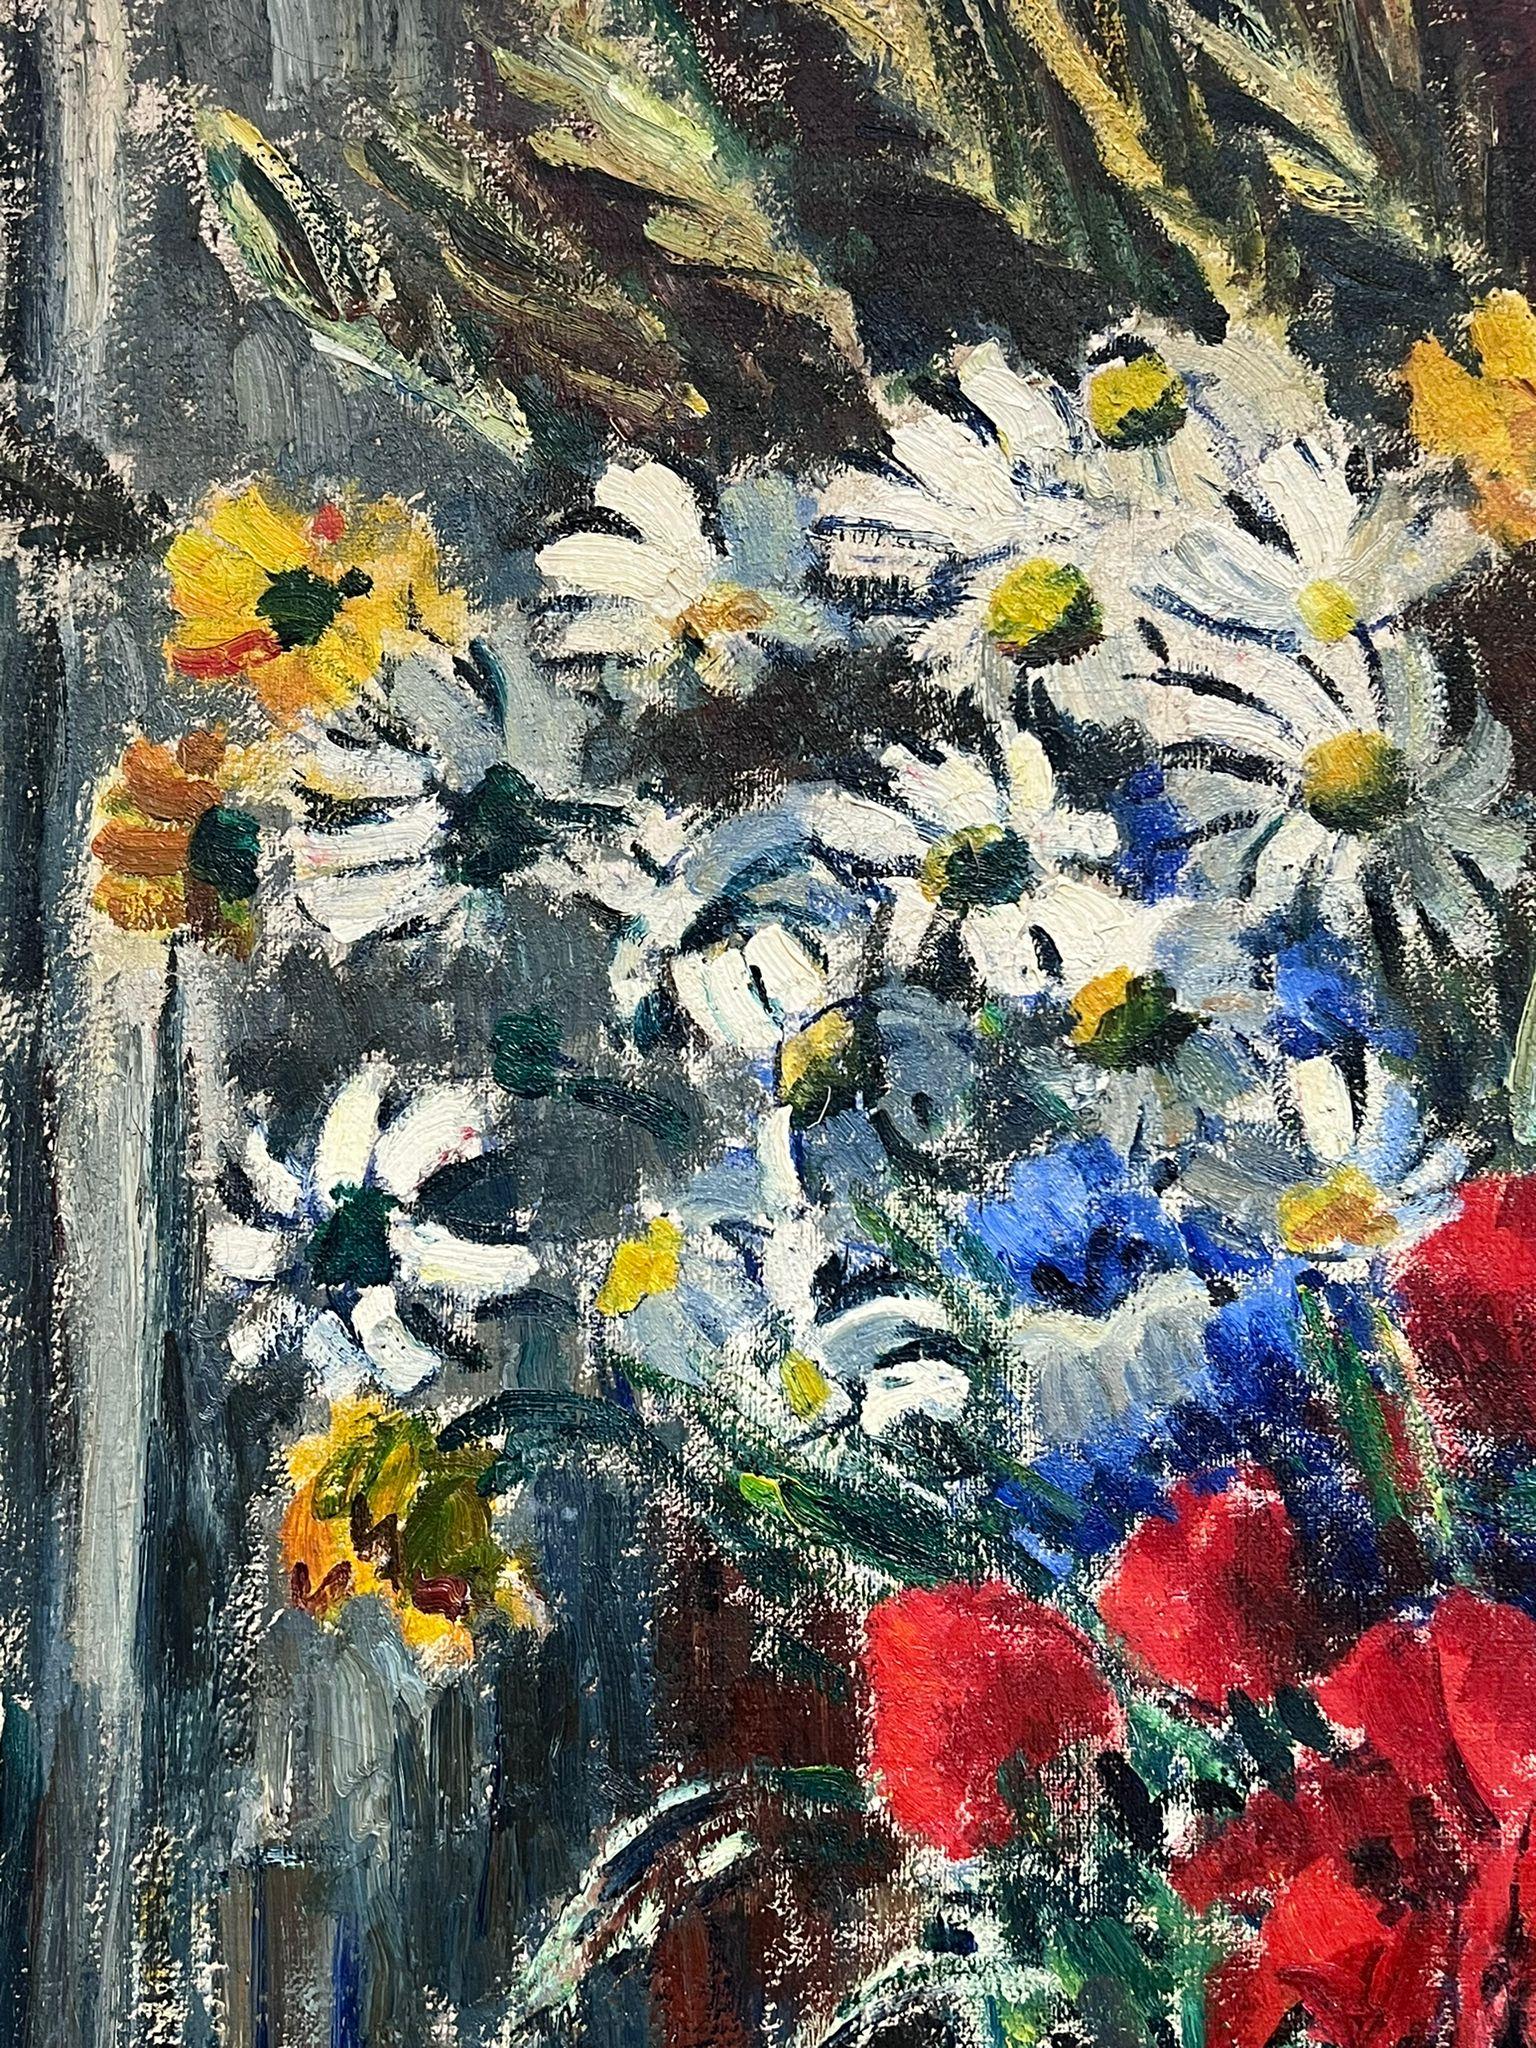 Still Life of Flowers in a Vase
French School, mid 20th century
signed oil on canvas, unframed
canvas: 36 x 29 inches
provenance: private collection, France
condition: very good and sound condition, a few minor scuffs and marks from its vintage age. 